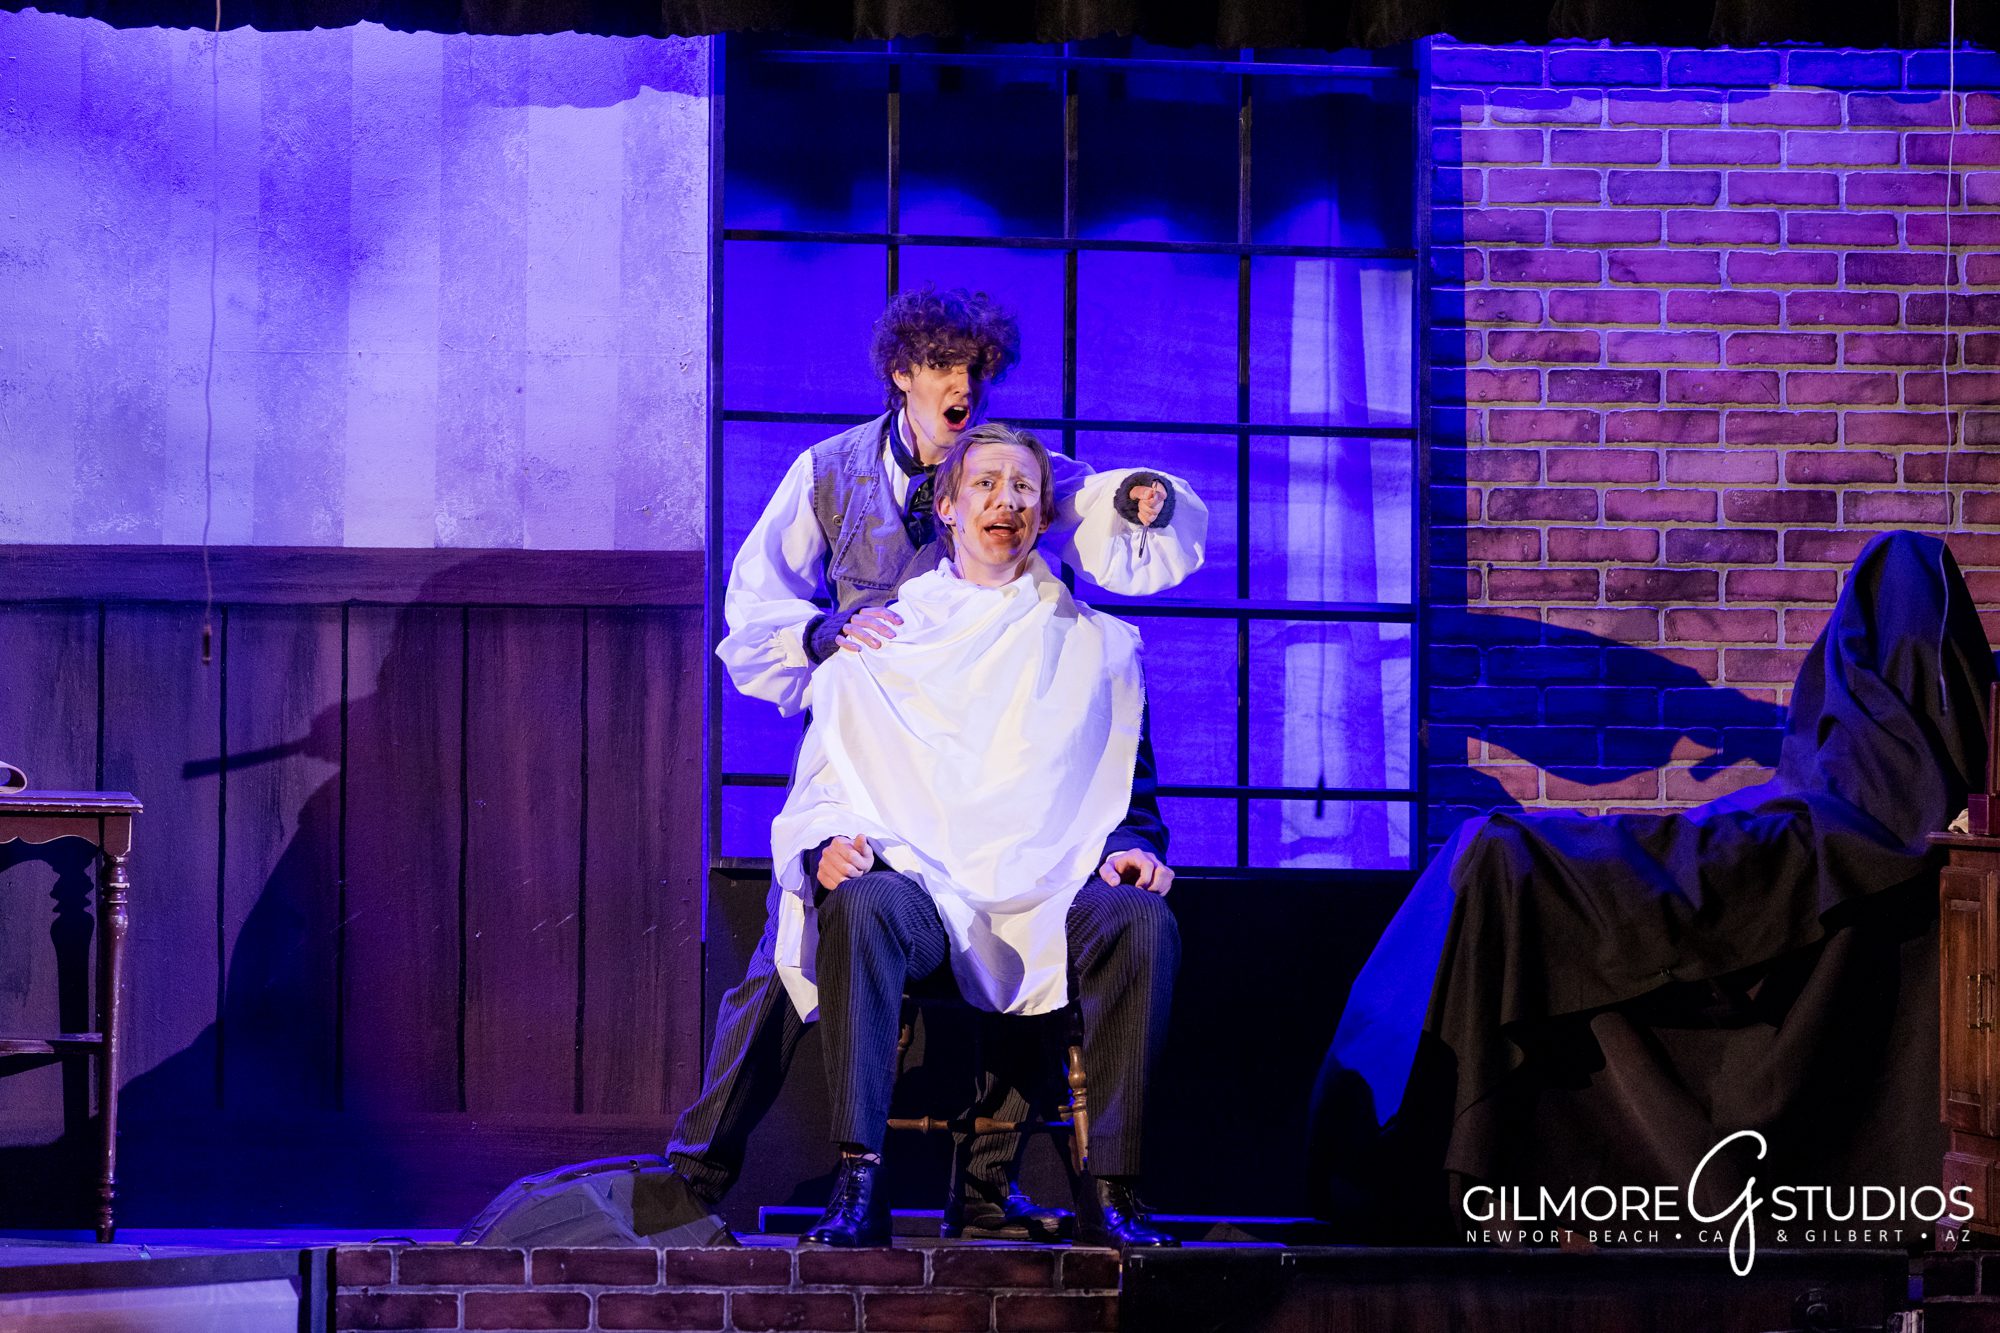 Sweeney Todd, theater, musical, performing arts, acting, actor, actress, stage, set, lighting, photography, Gilbert performing arts photographer, Orange County performing arts photography, Braver Players play company, youth theater, community theaters